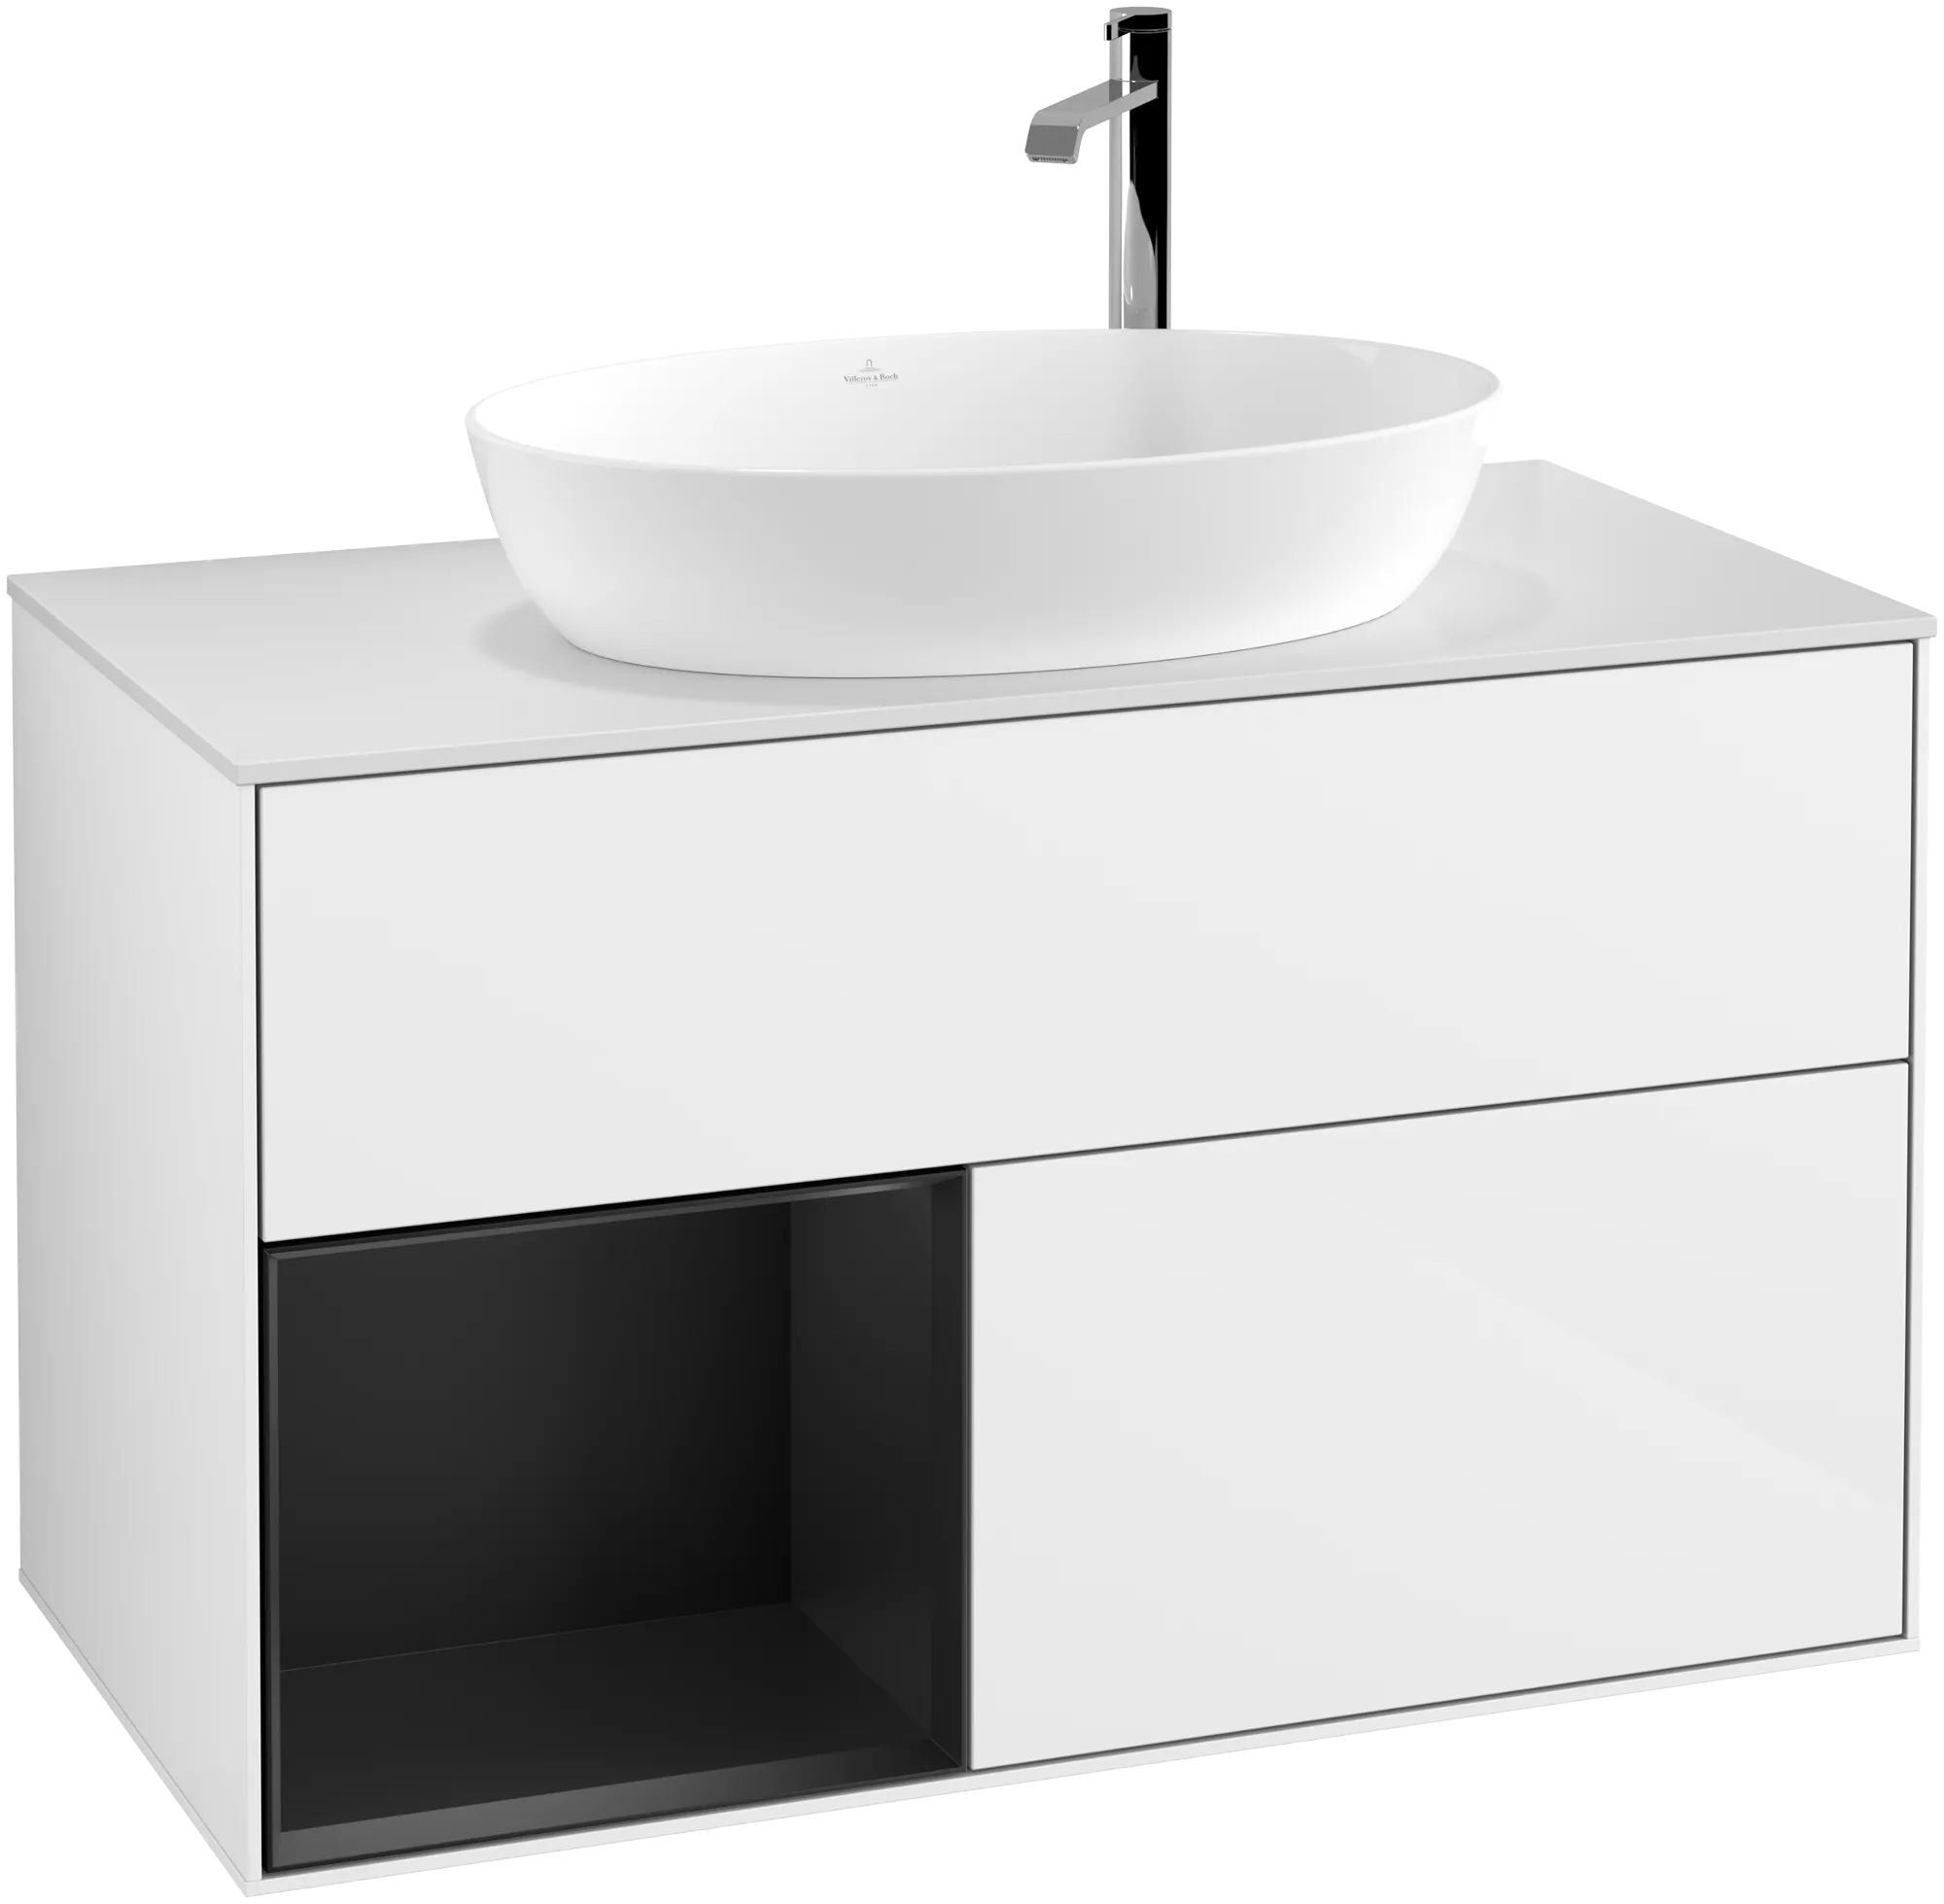 VILLEROY BOCH Finion Vanity unit, with lighting, 2 pull-out compartments, 1000 x 603 x 501 mm, Glossy White Lacquer / Black Matt Lacquer / Glass White Matt #G891PDGF resmi